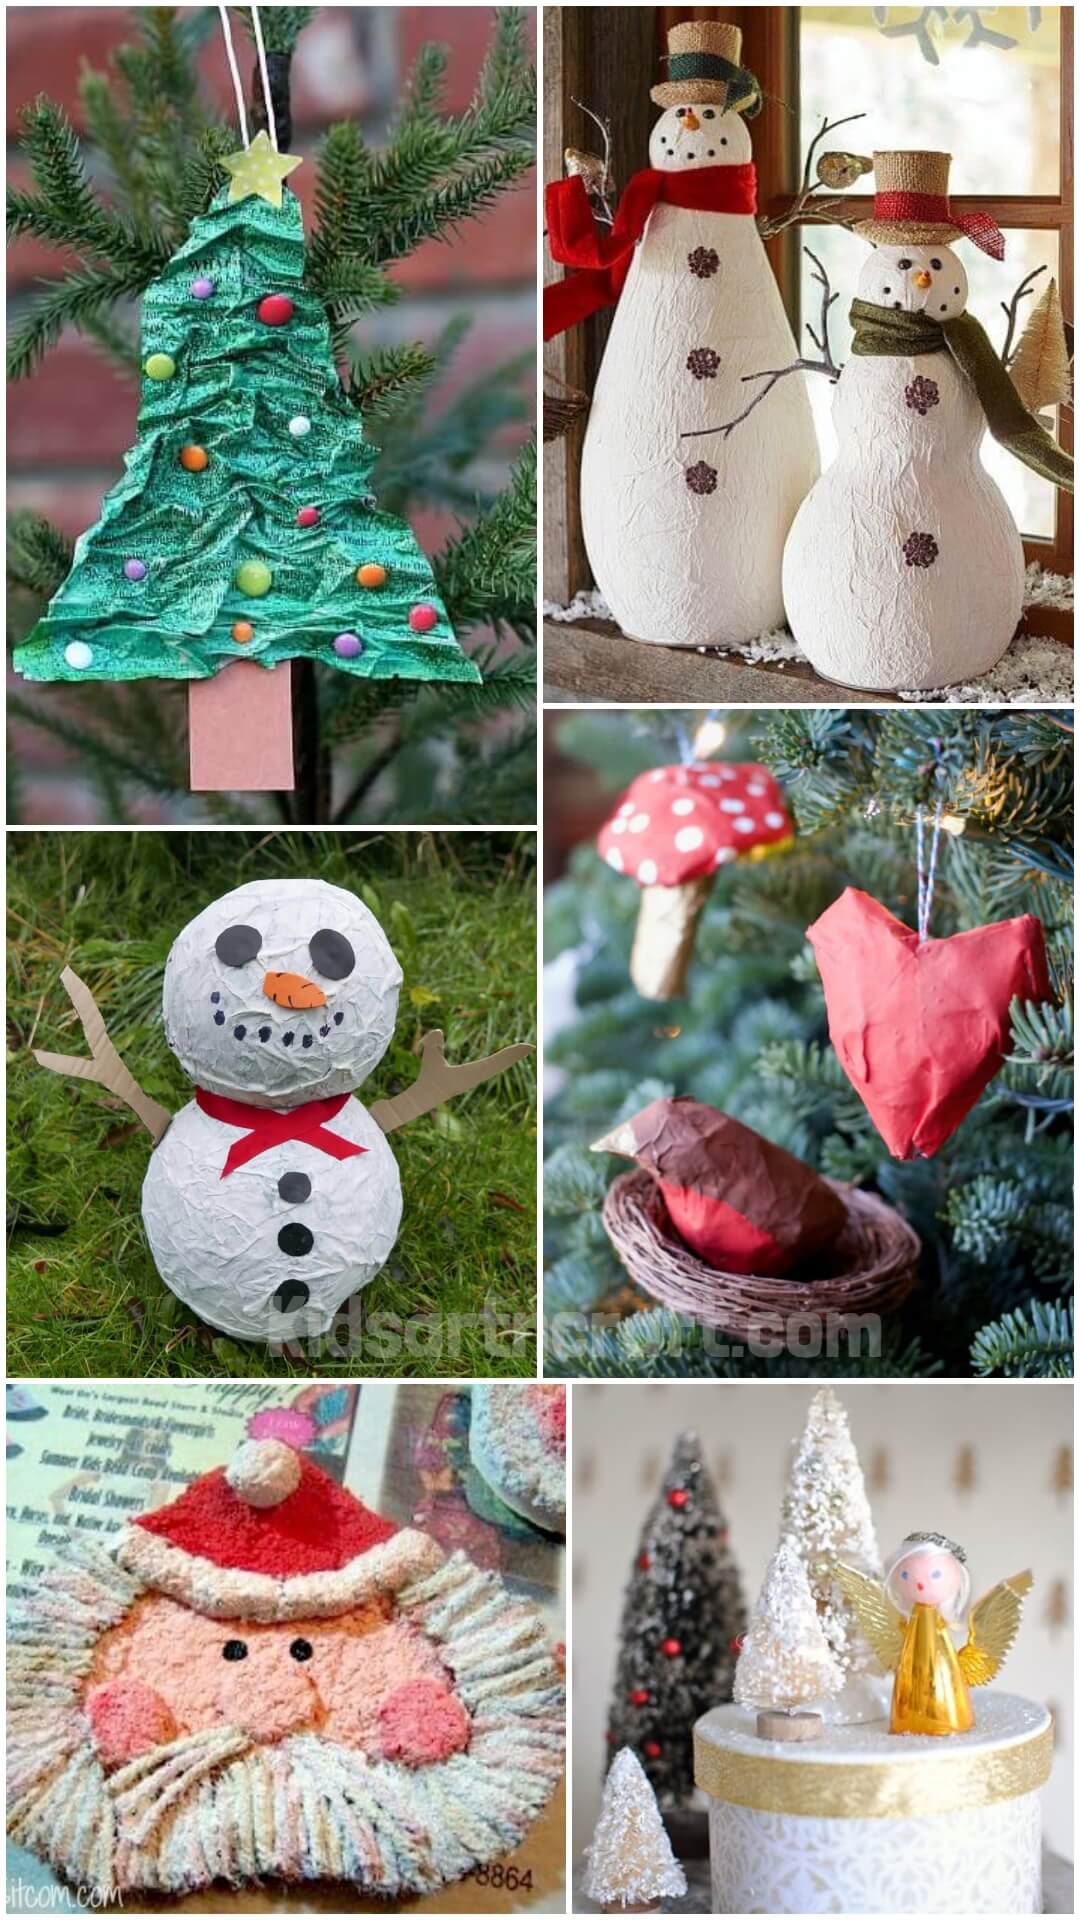 Paper Mache Decoration Crafts For Christmas